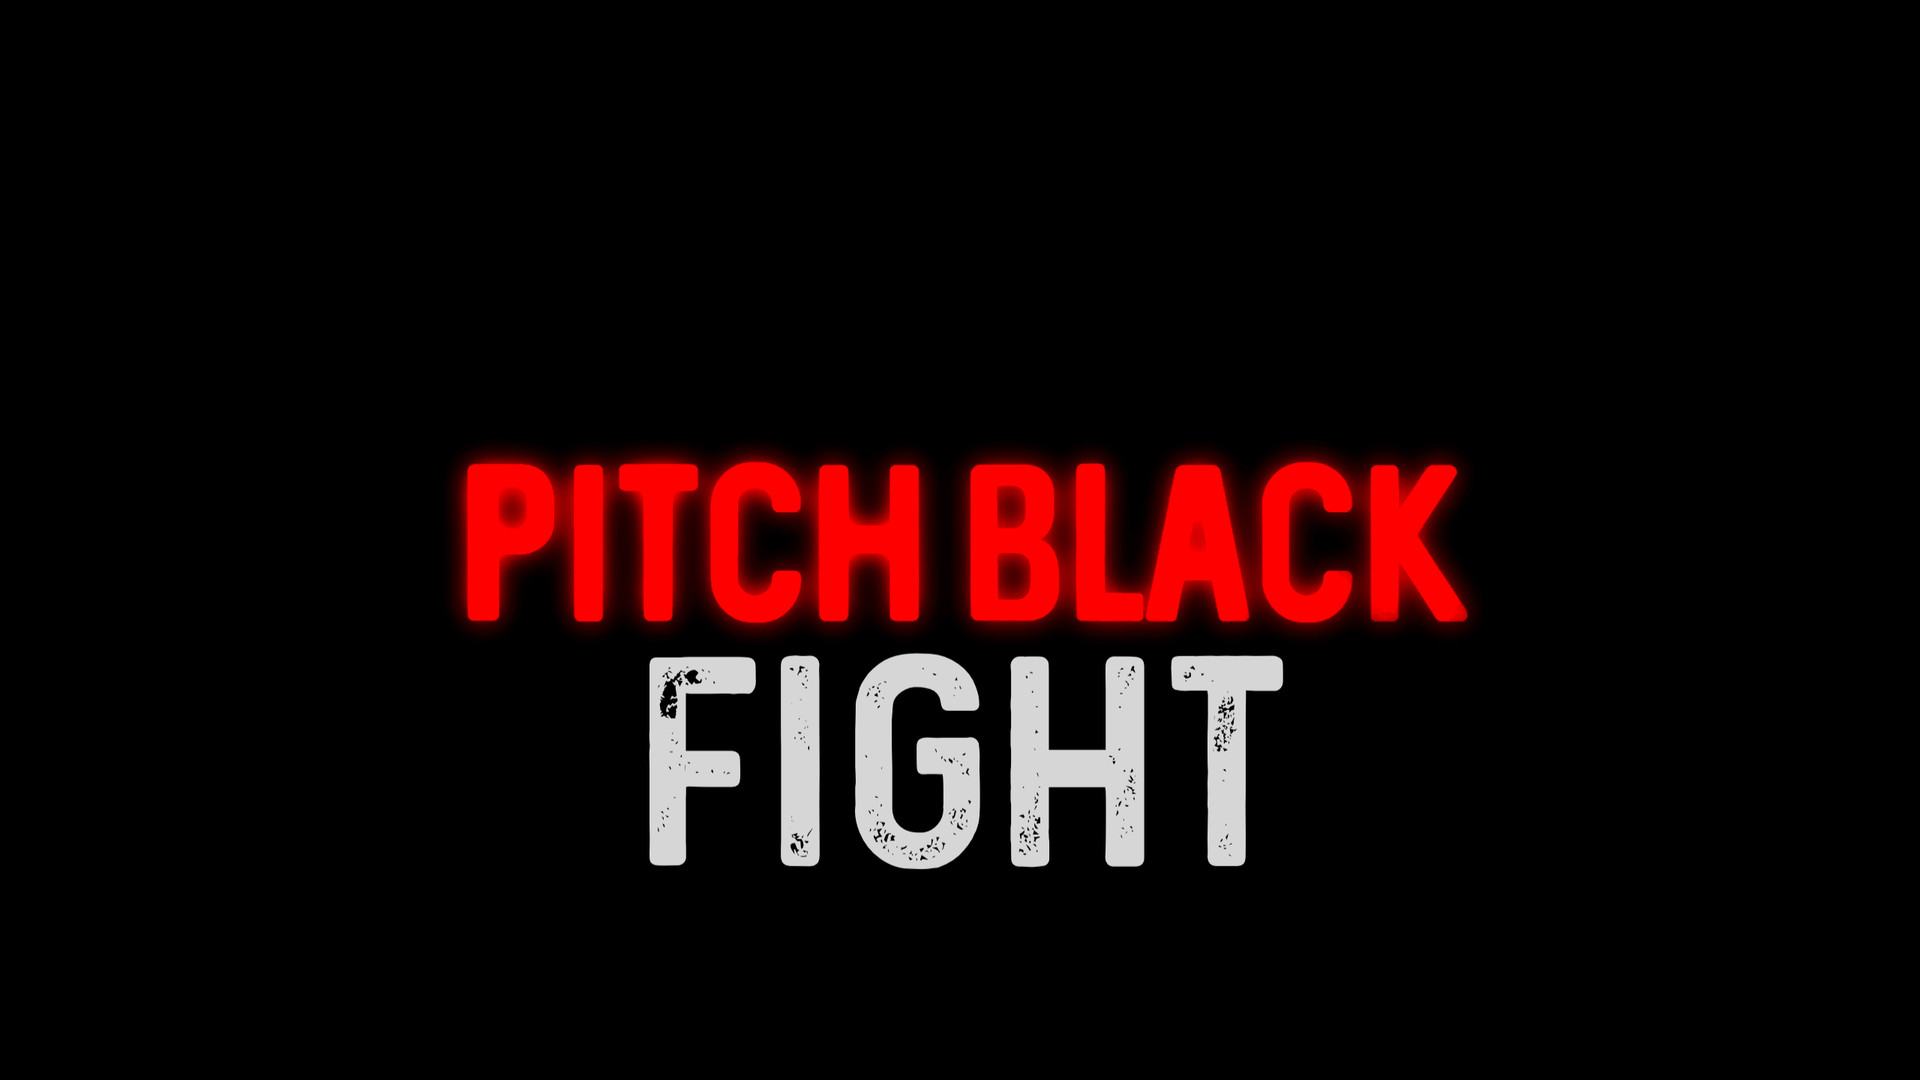 Pitch Black: A Dusklight Story - Episode One Free Download